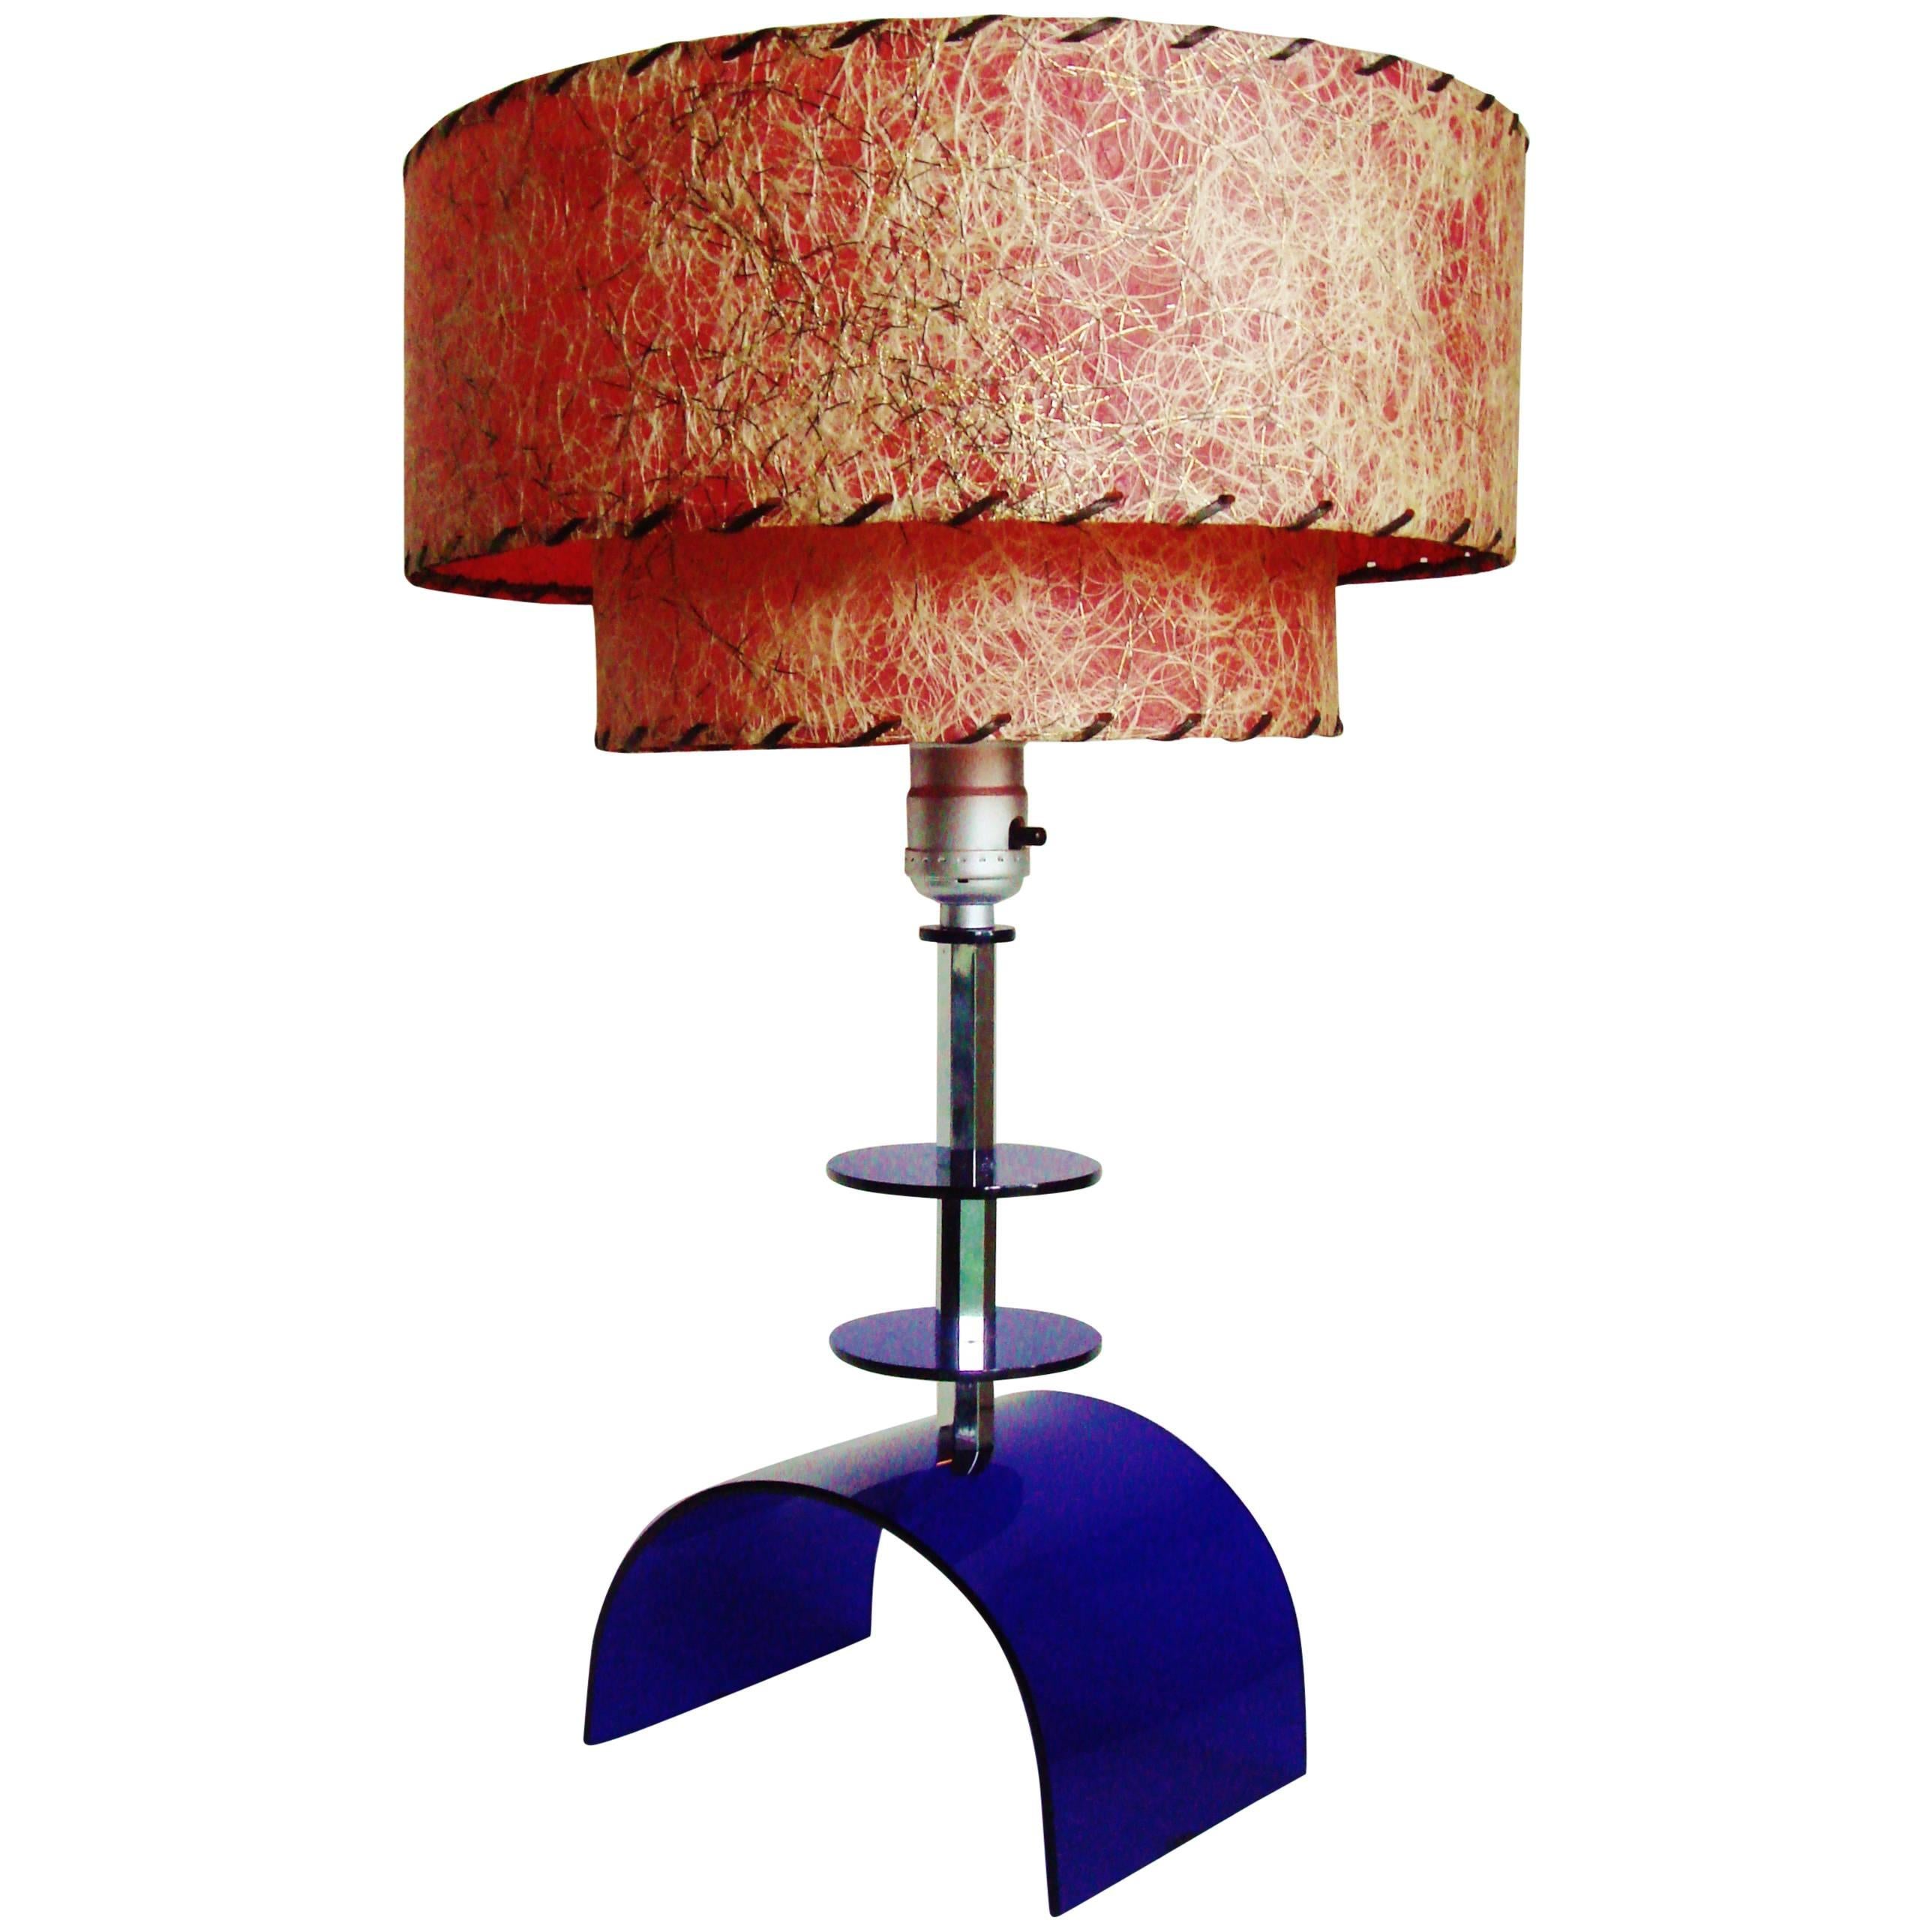 American Mid-Century Cobalt Lucite & Chrome Table Lamp with Red Two-Tiered Shade For Sale